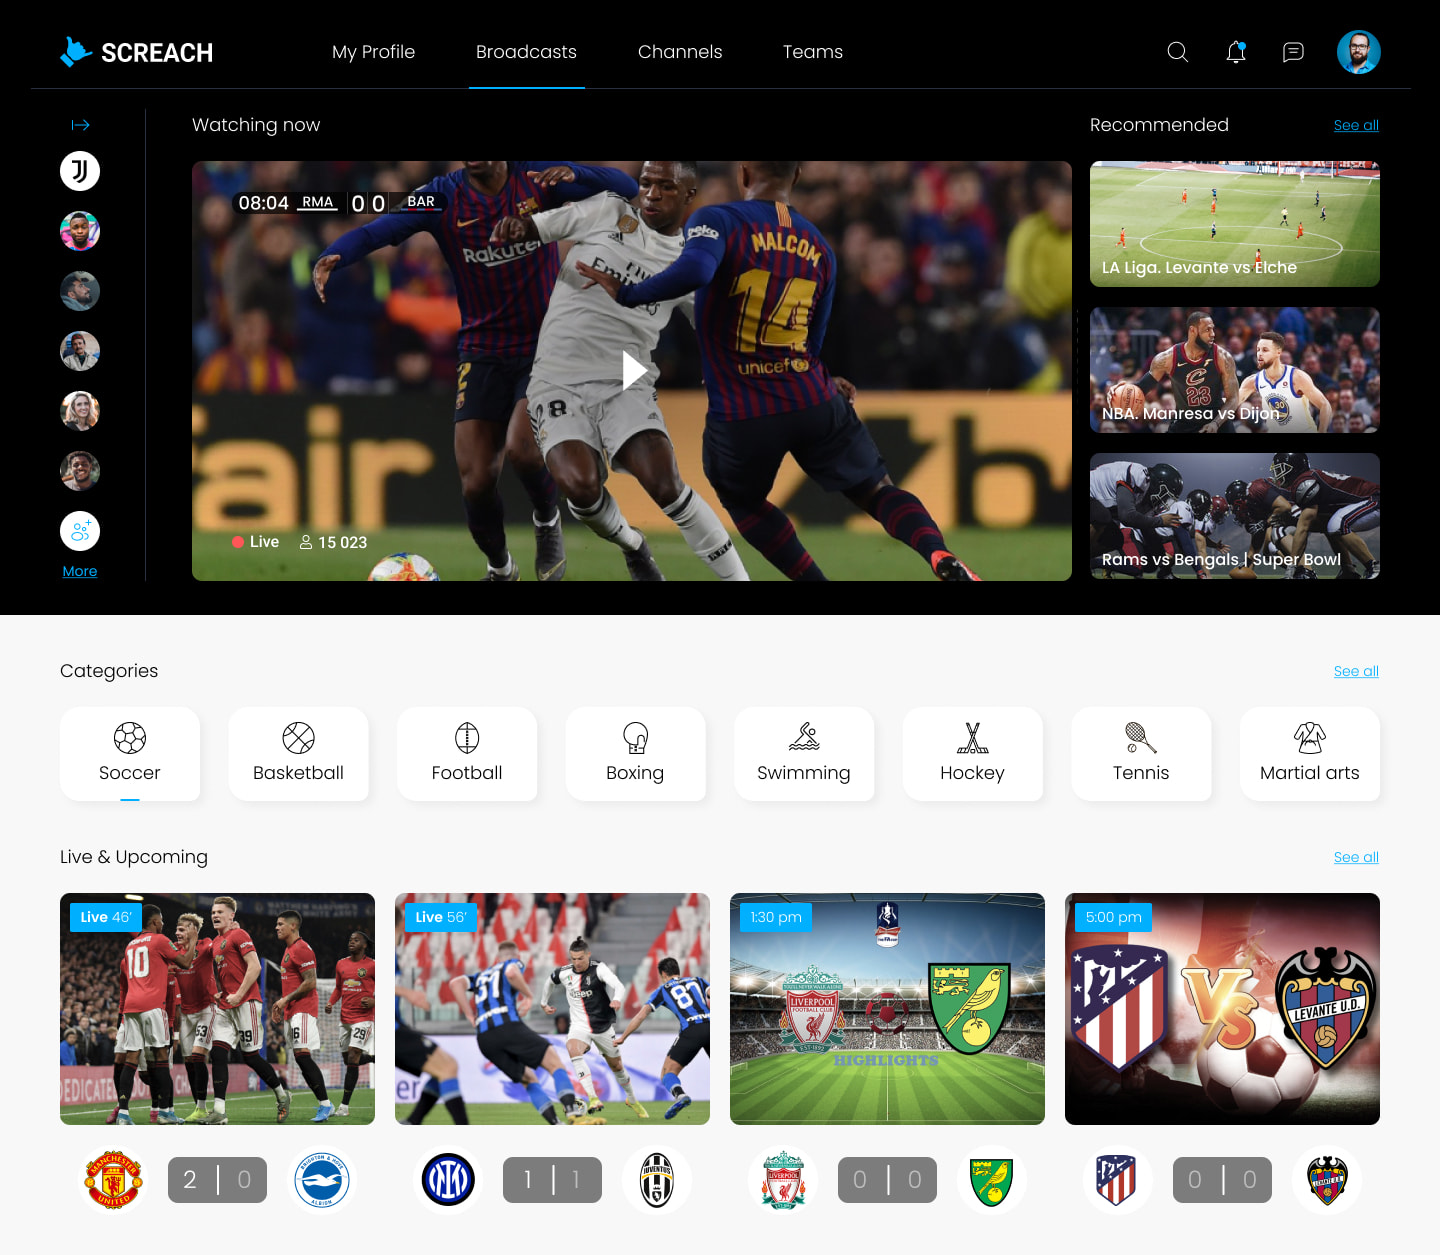 Tab with sports categories and recommended broadcasts